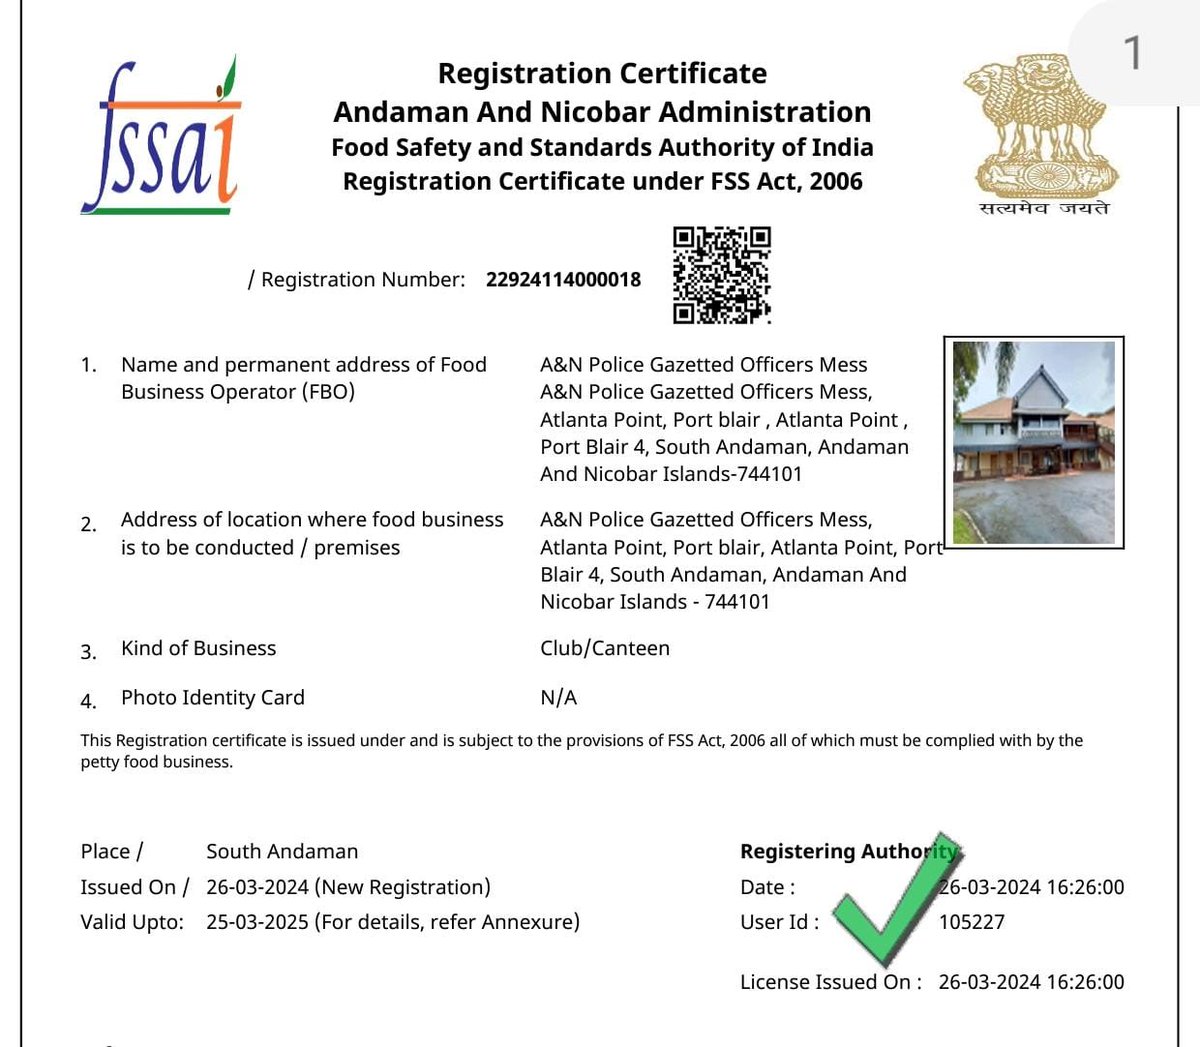 #EatRightIndia @IRBn_ANP, Armed Police Unit & Police Training School of A&NPolice just got the #FSSAI Registration Certificate for its Messes and Canteens! It's a testament to our unwavering commitment to provide safe & nutritious food to the members of our Police family.